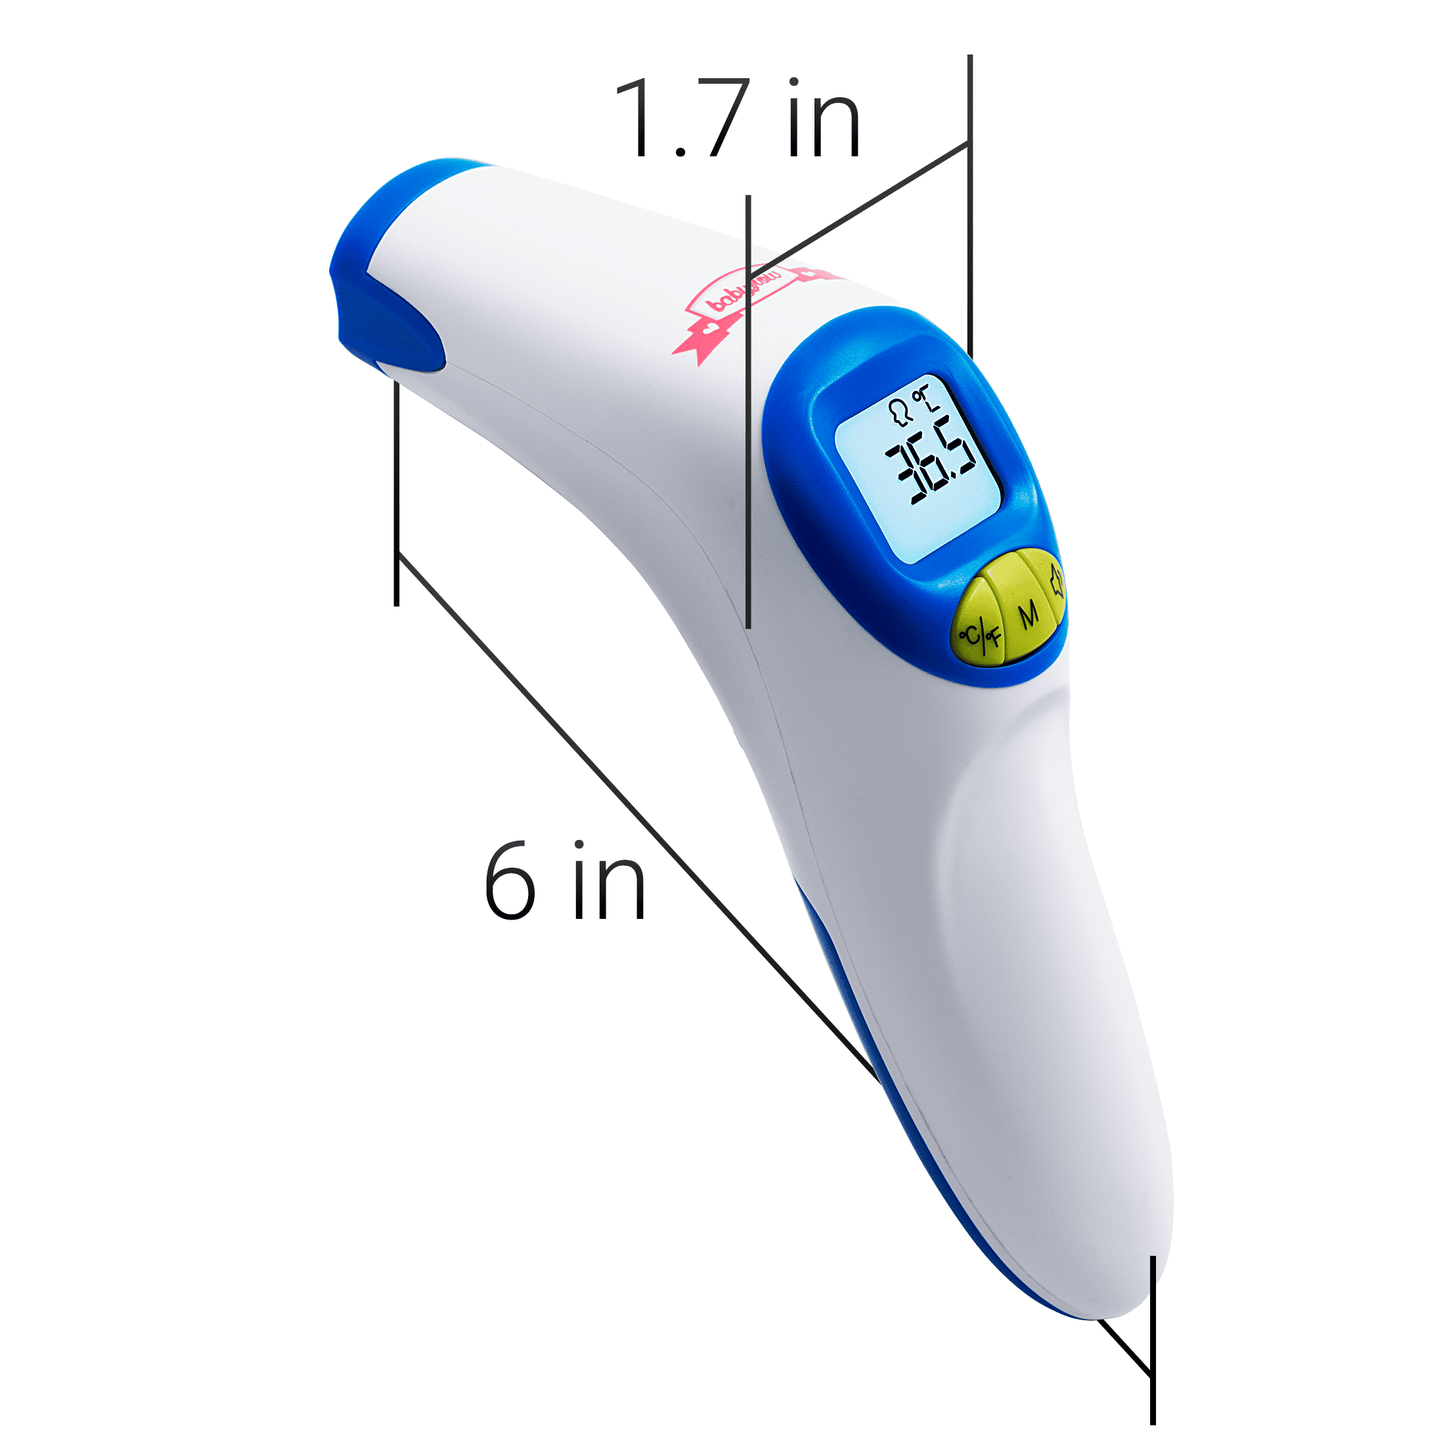 DIGITAL Thermometer Infra Red with Fever Alarm [WHOLESALE]